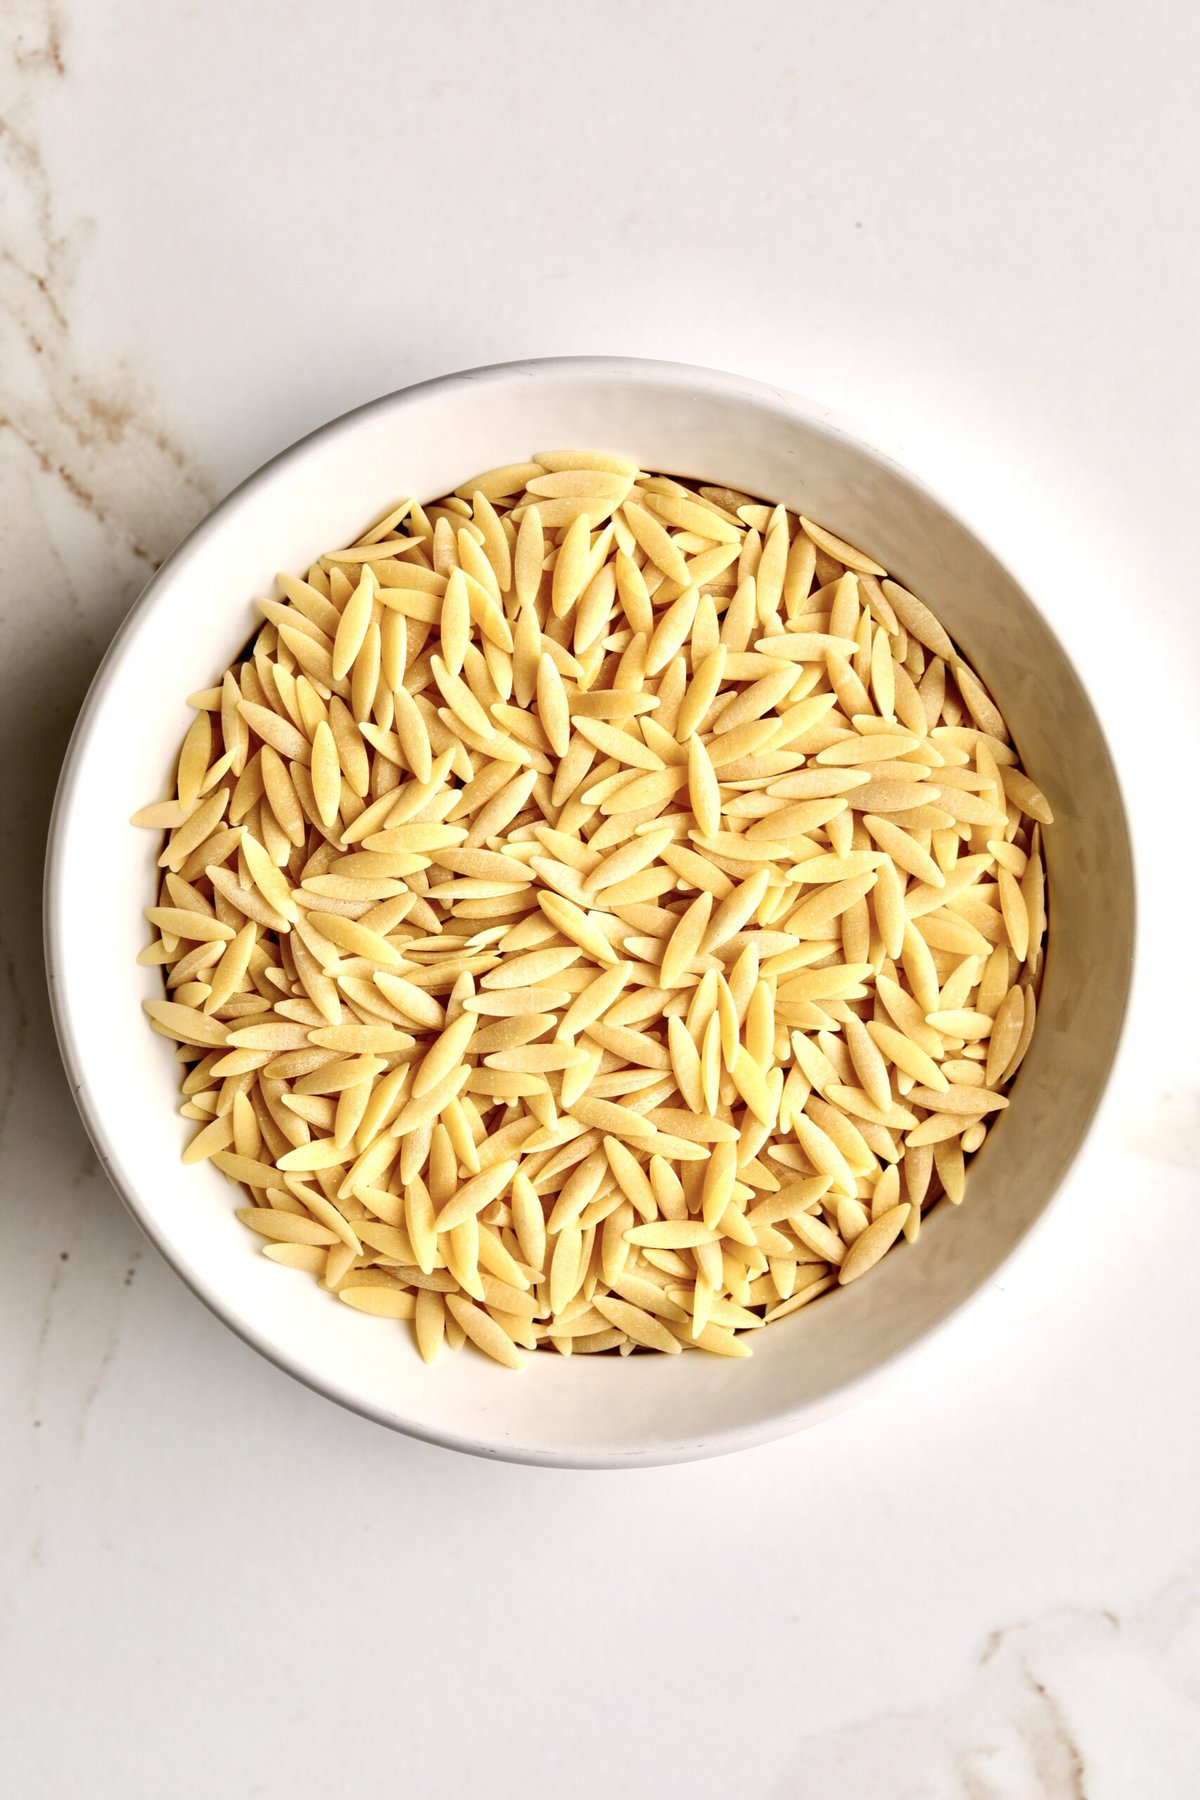 dry orzo pasta in a bowl.